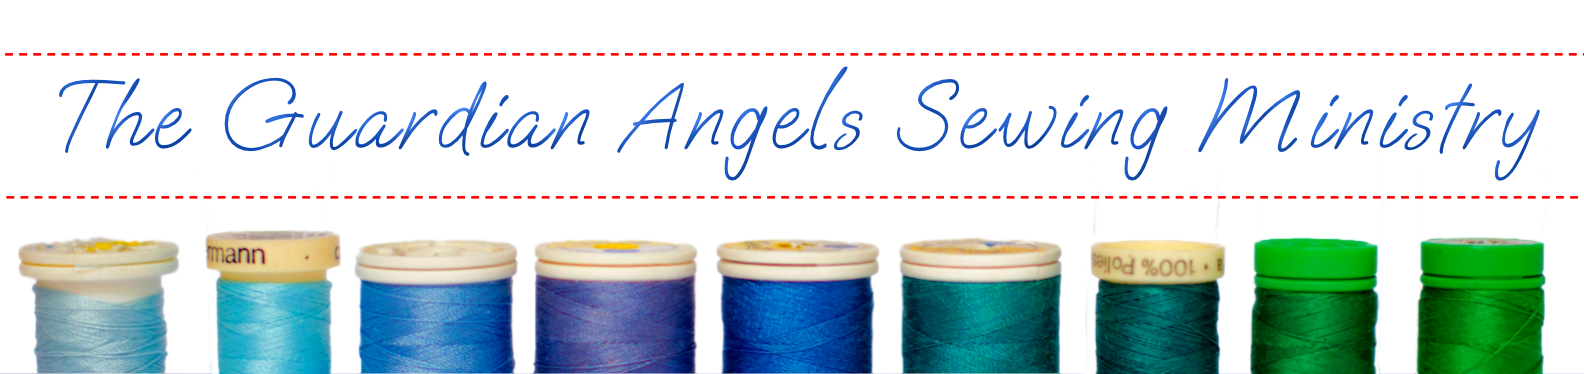 The Guardian Angels Sewing Ministry